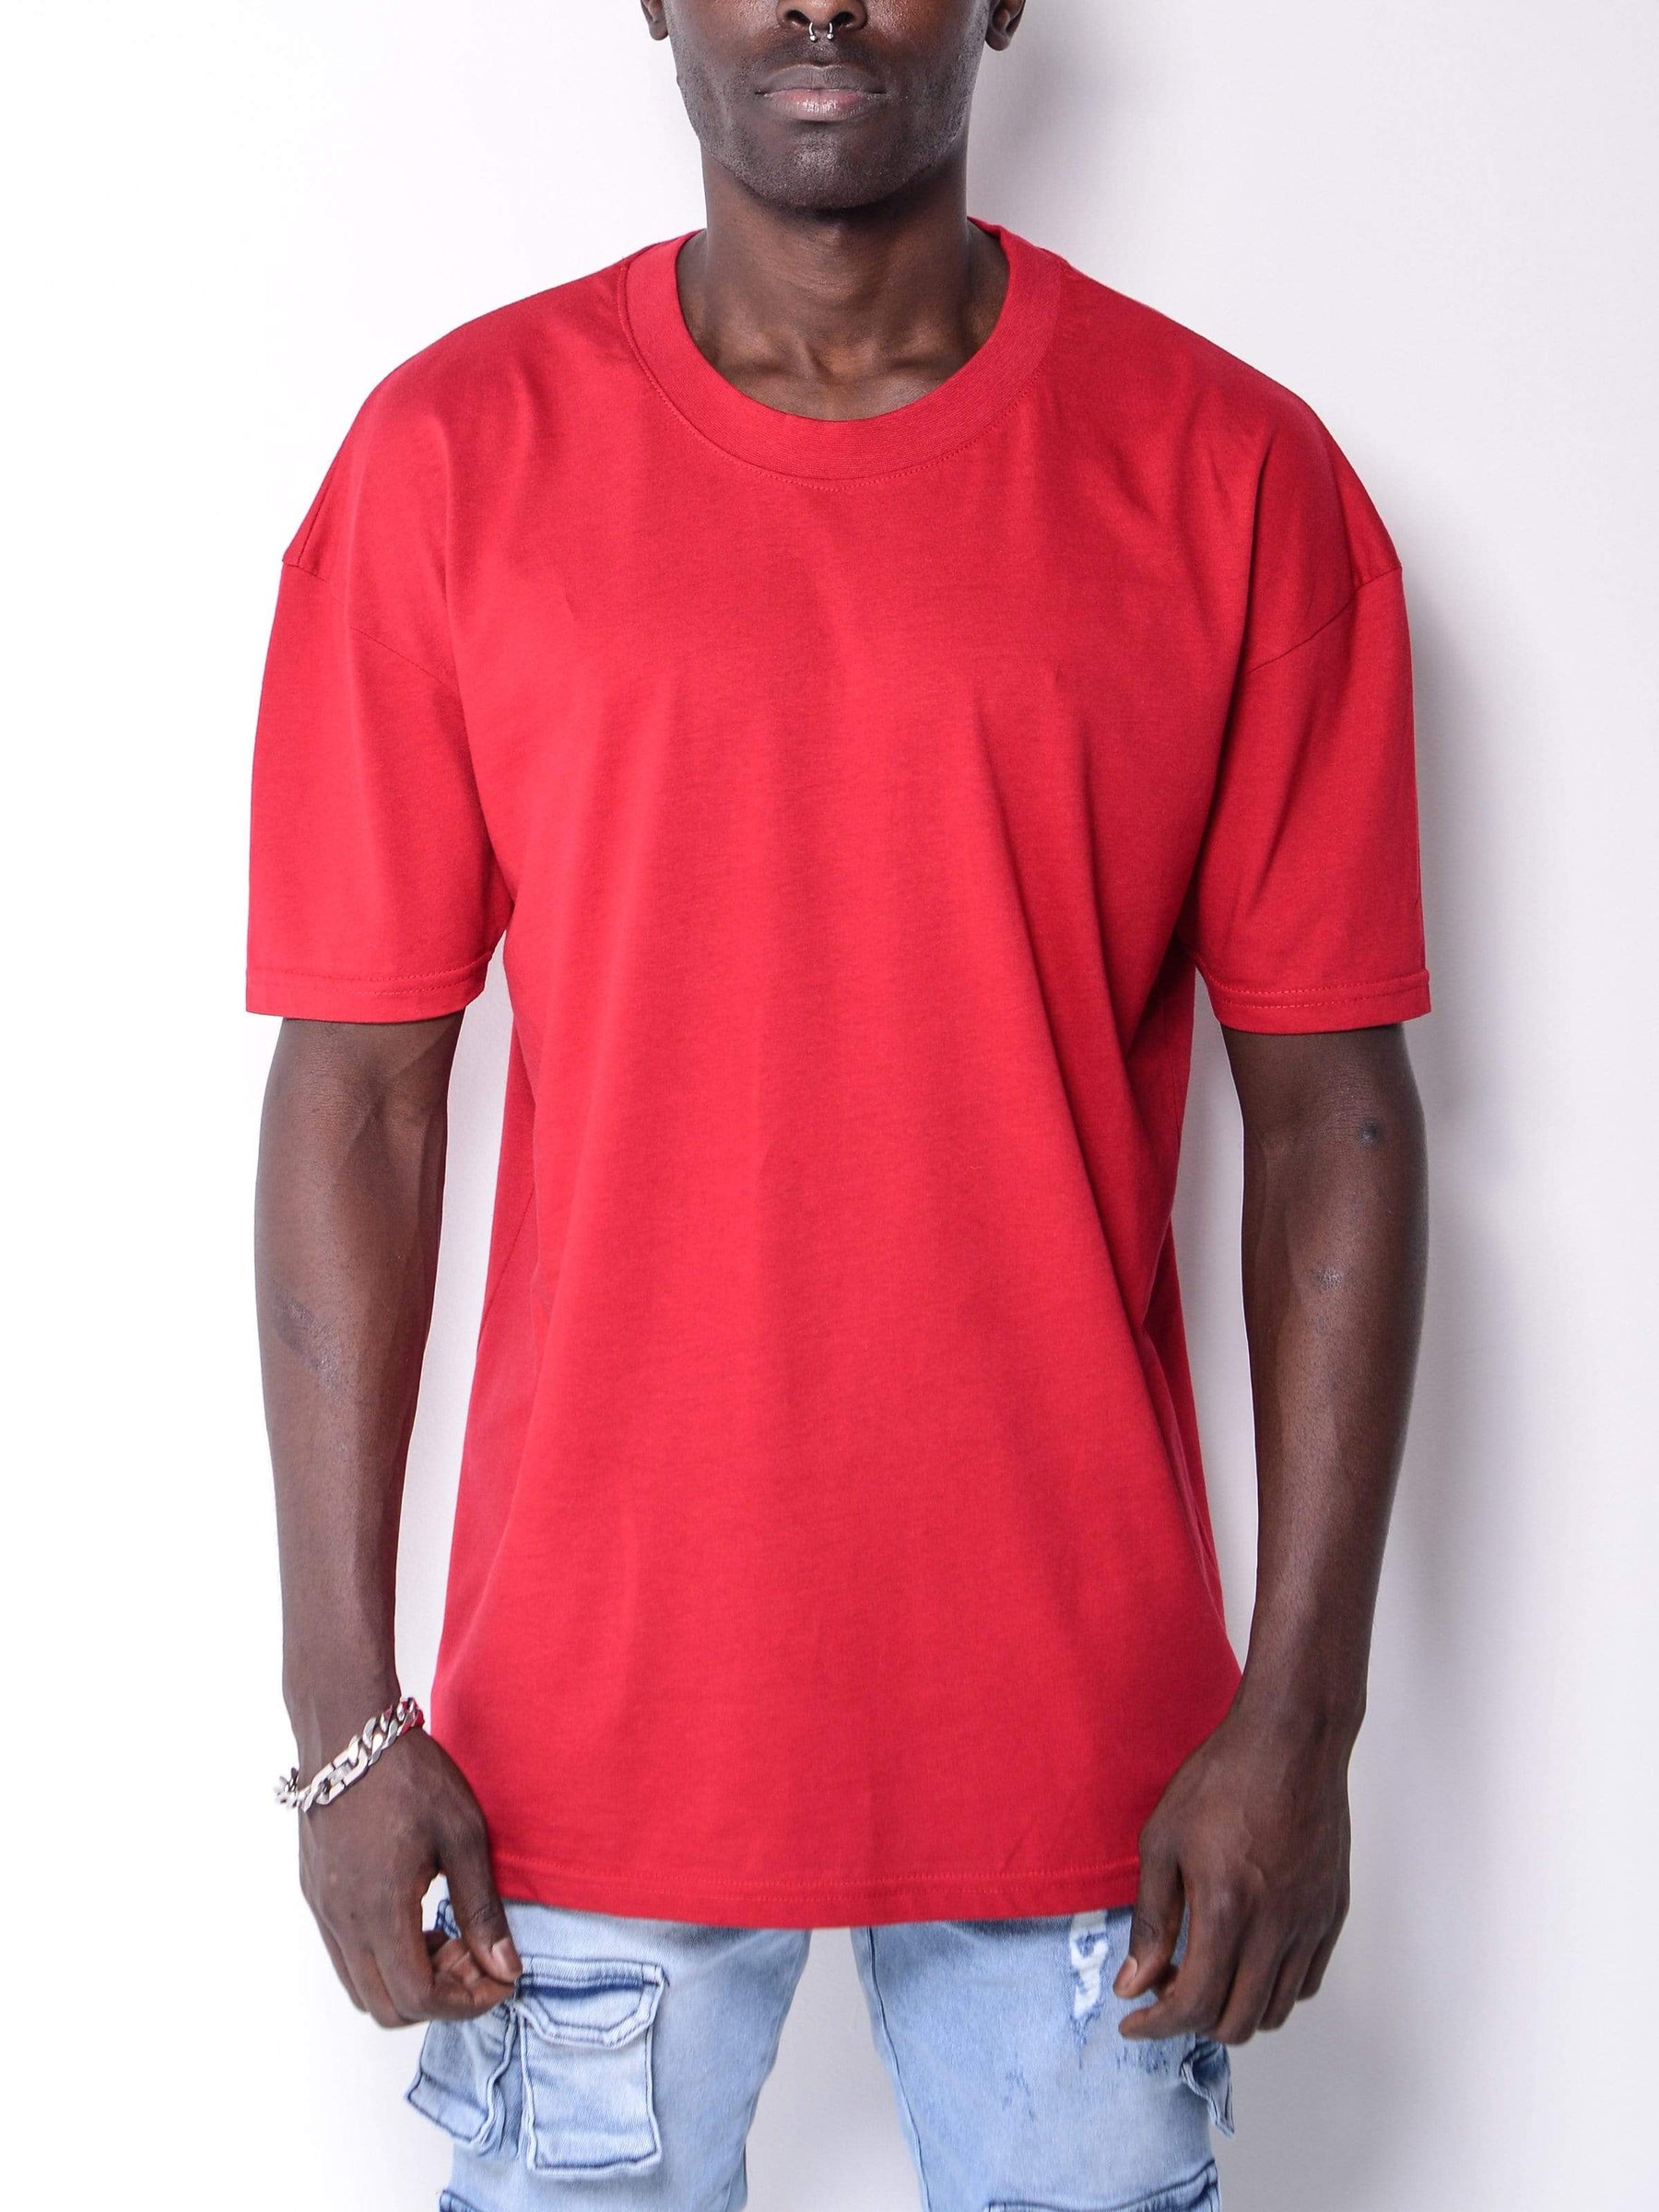 Red T-Shirt